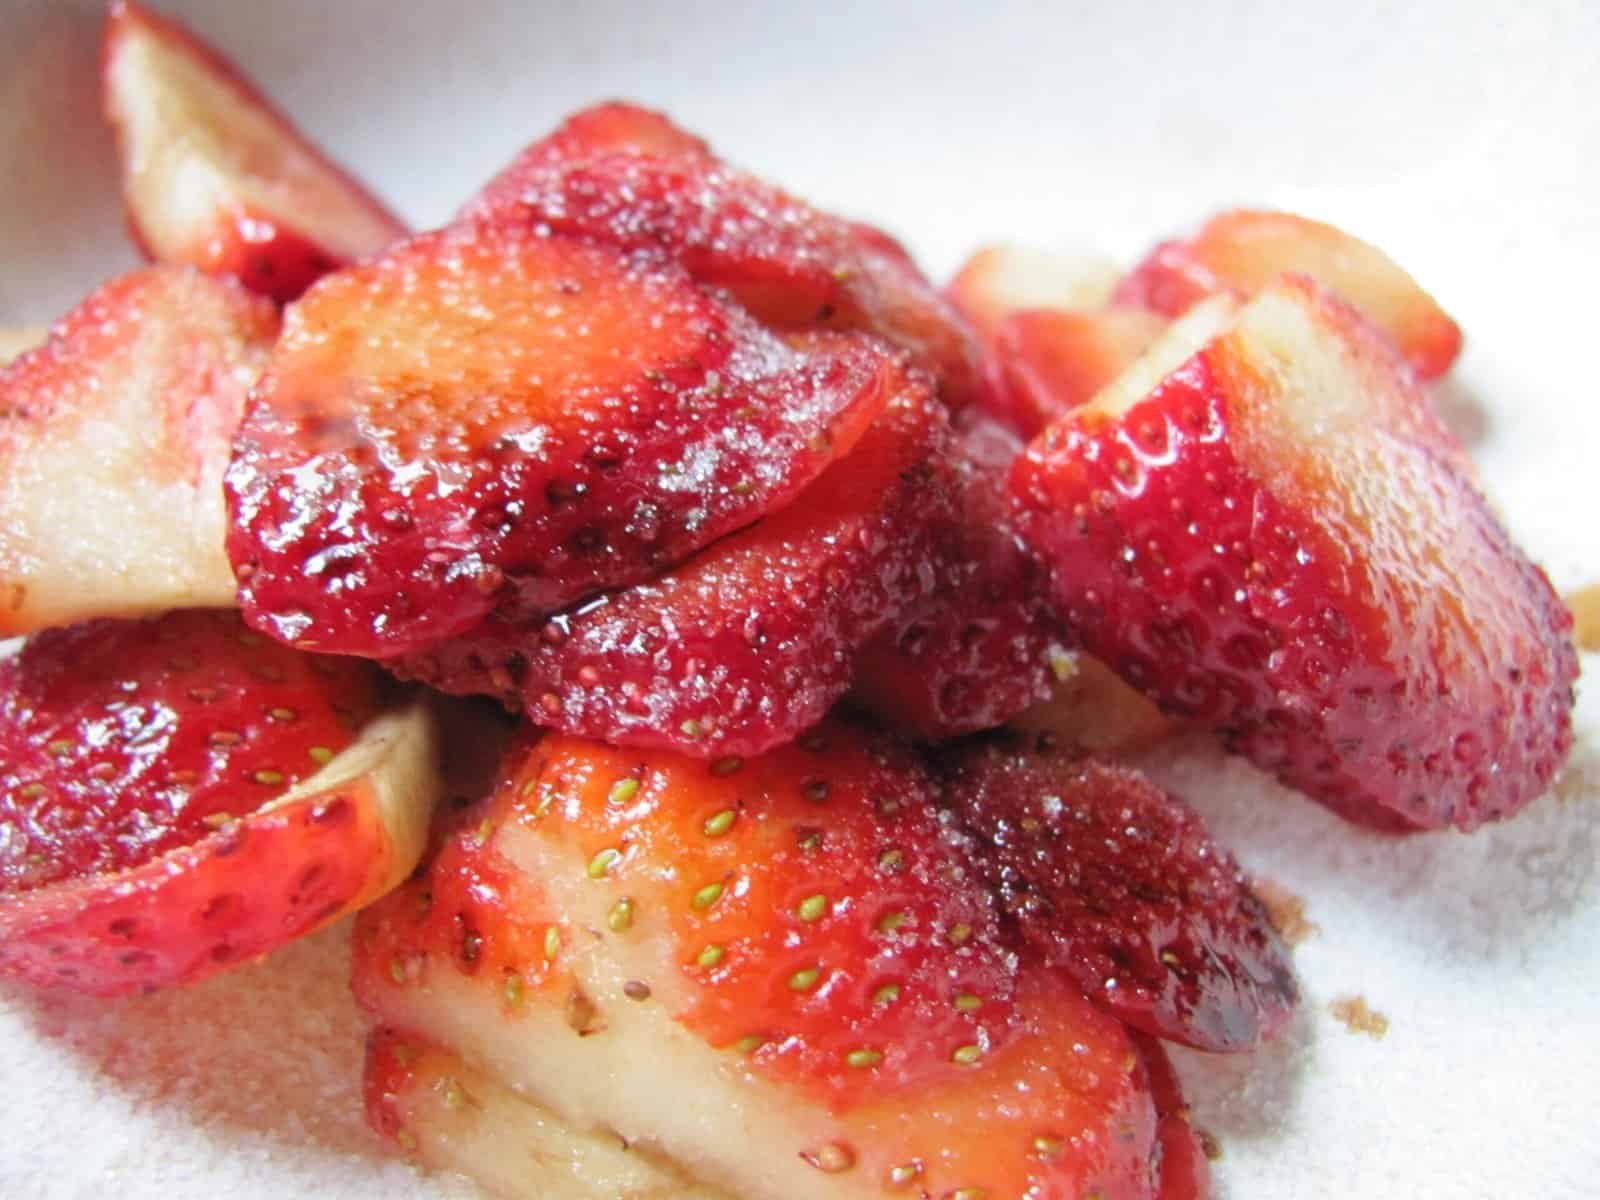  A splash of balsamic vinegar takes these strawberries to a whole new level.